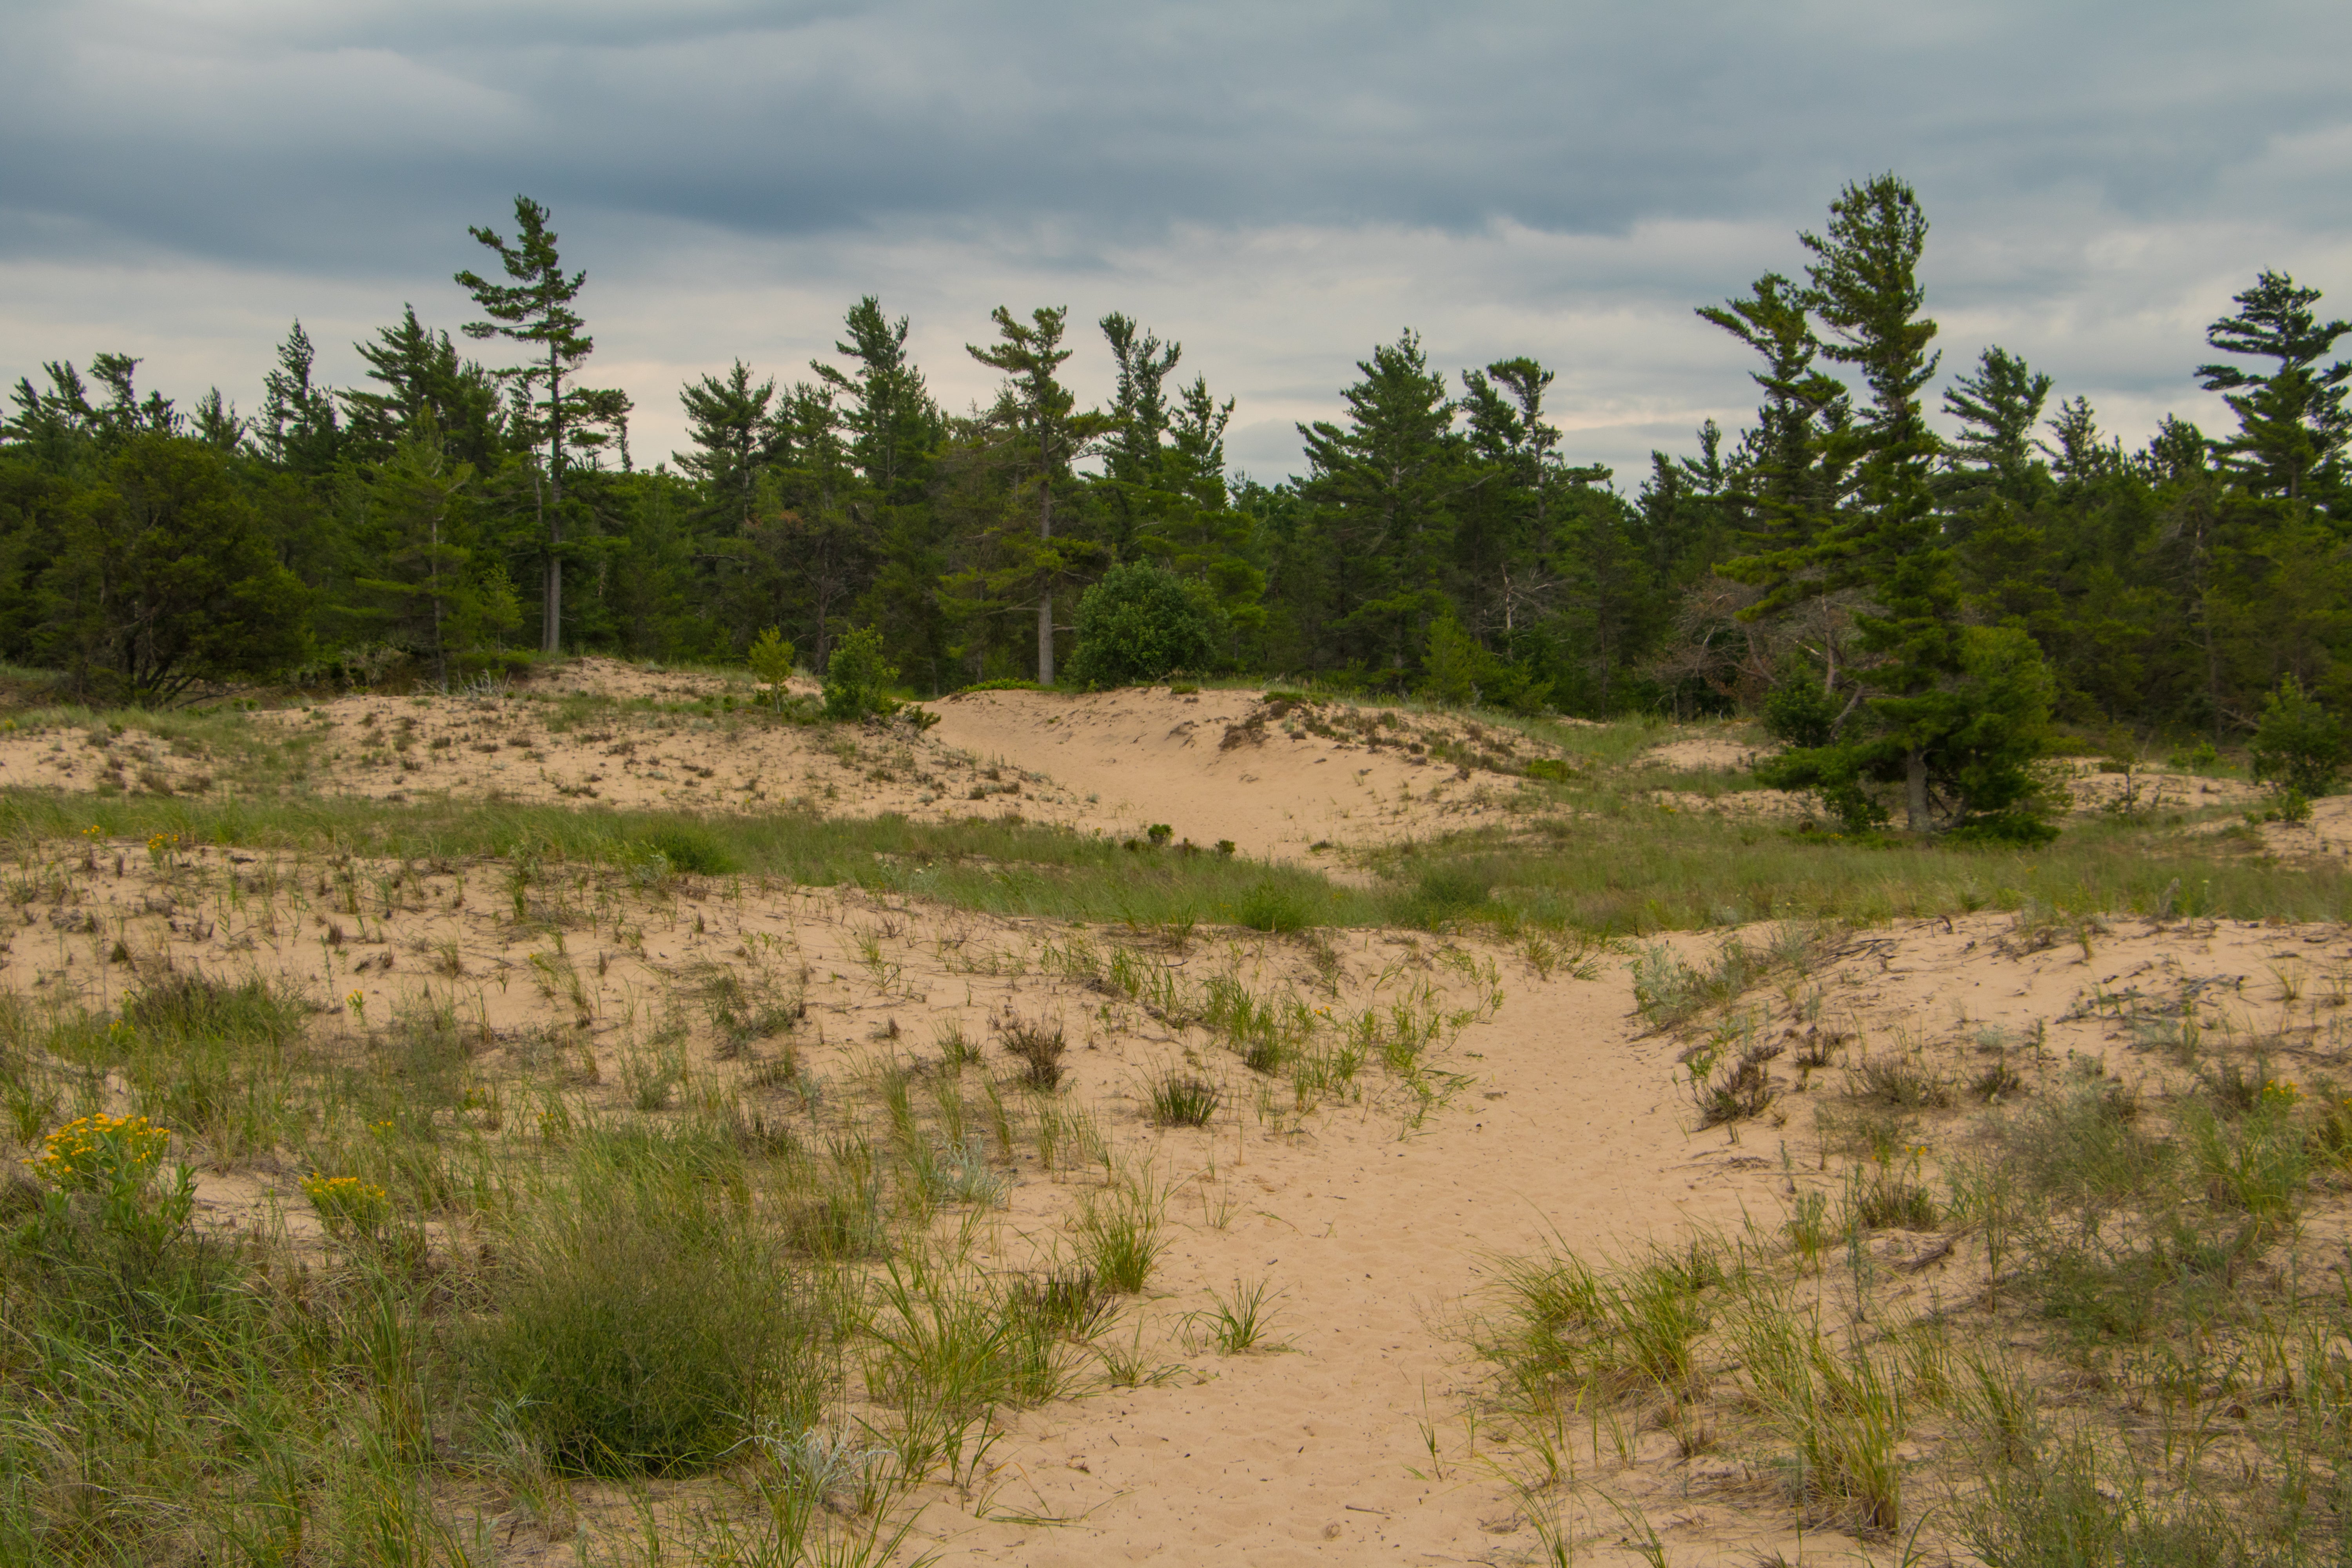 Dunes galore...and lots more to explore!